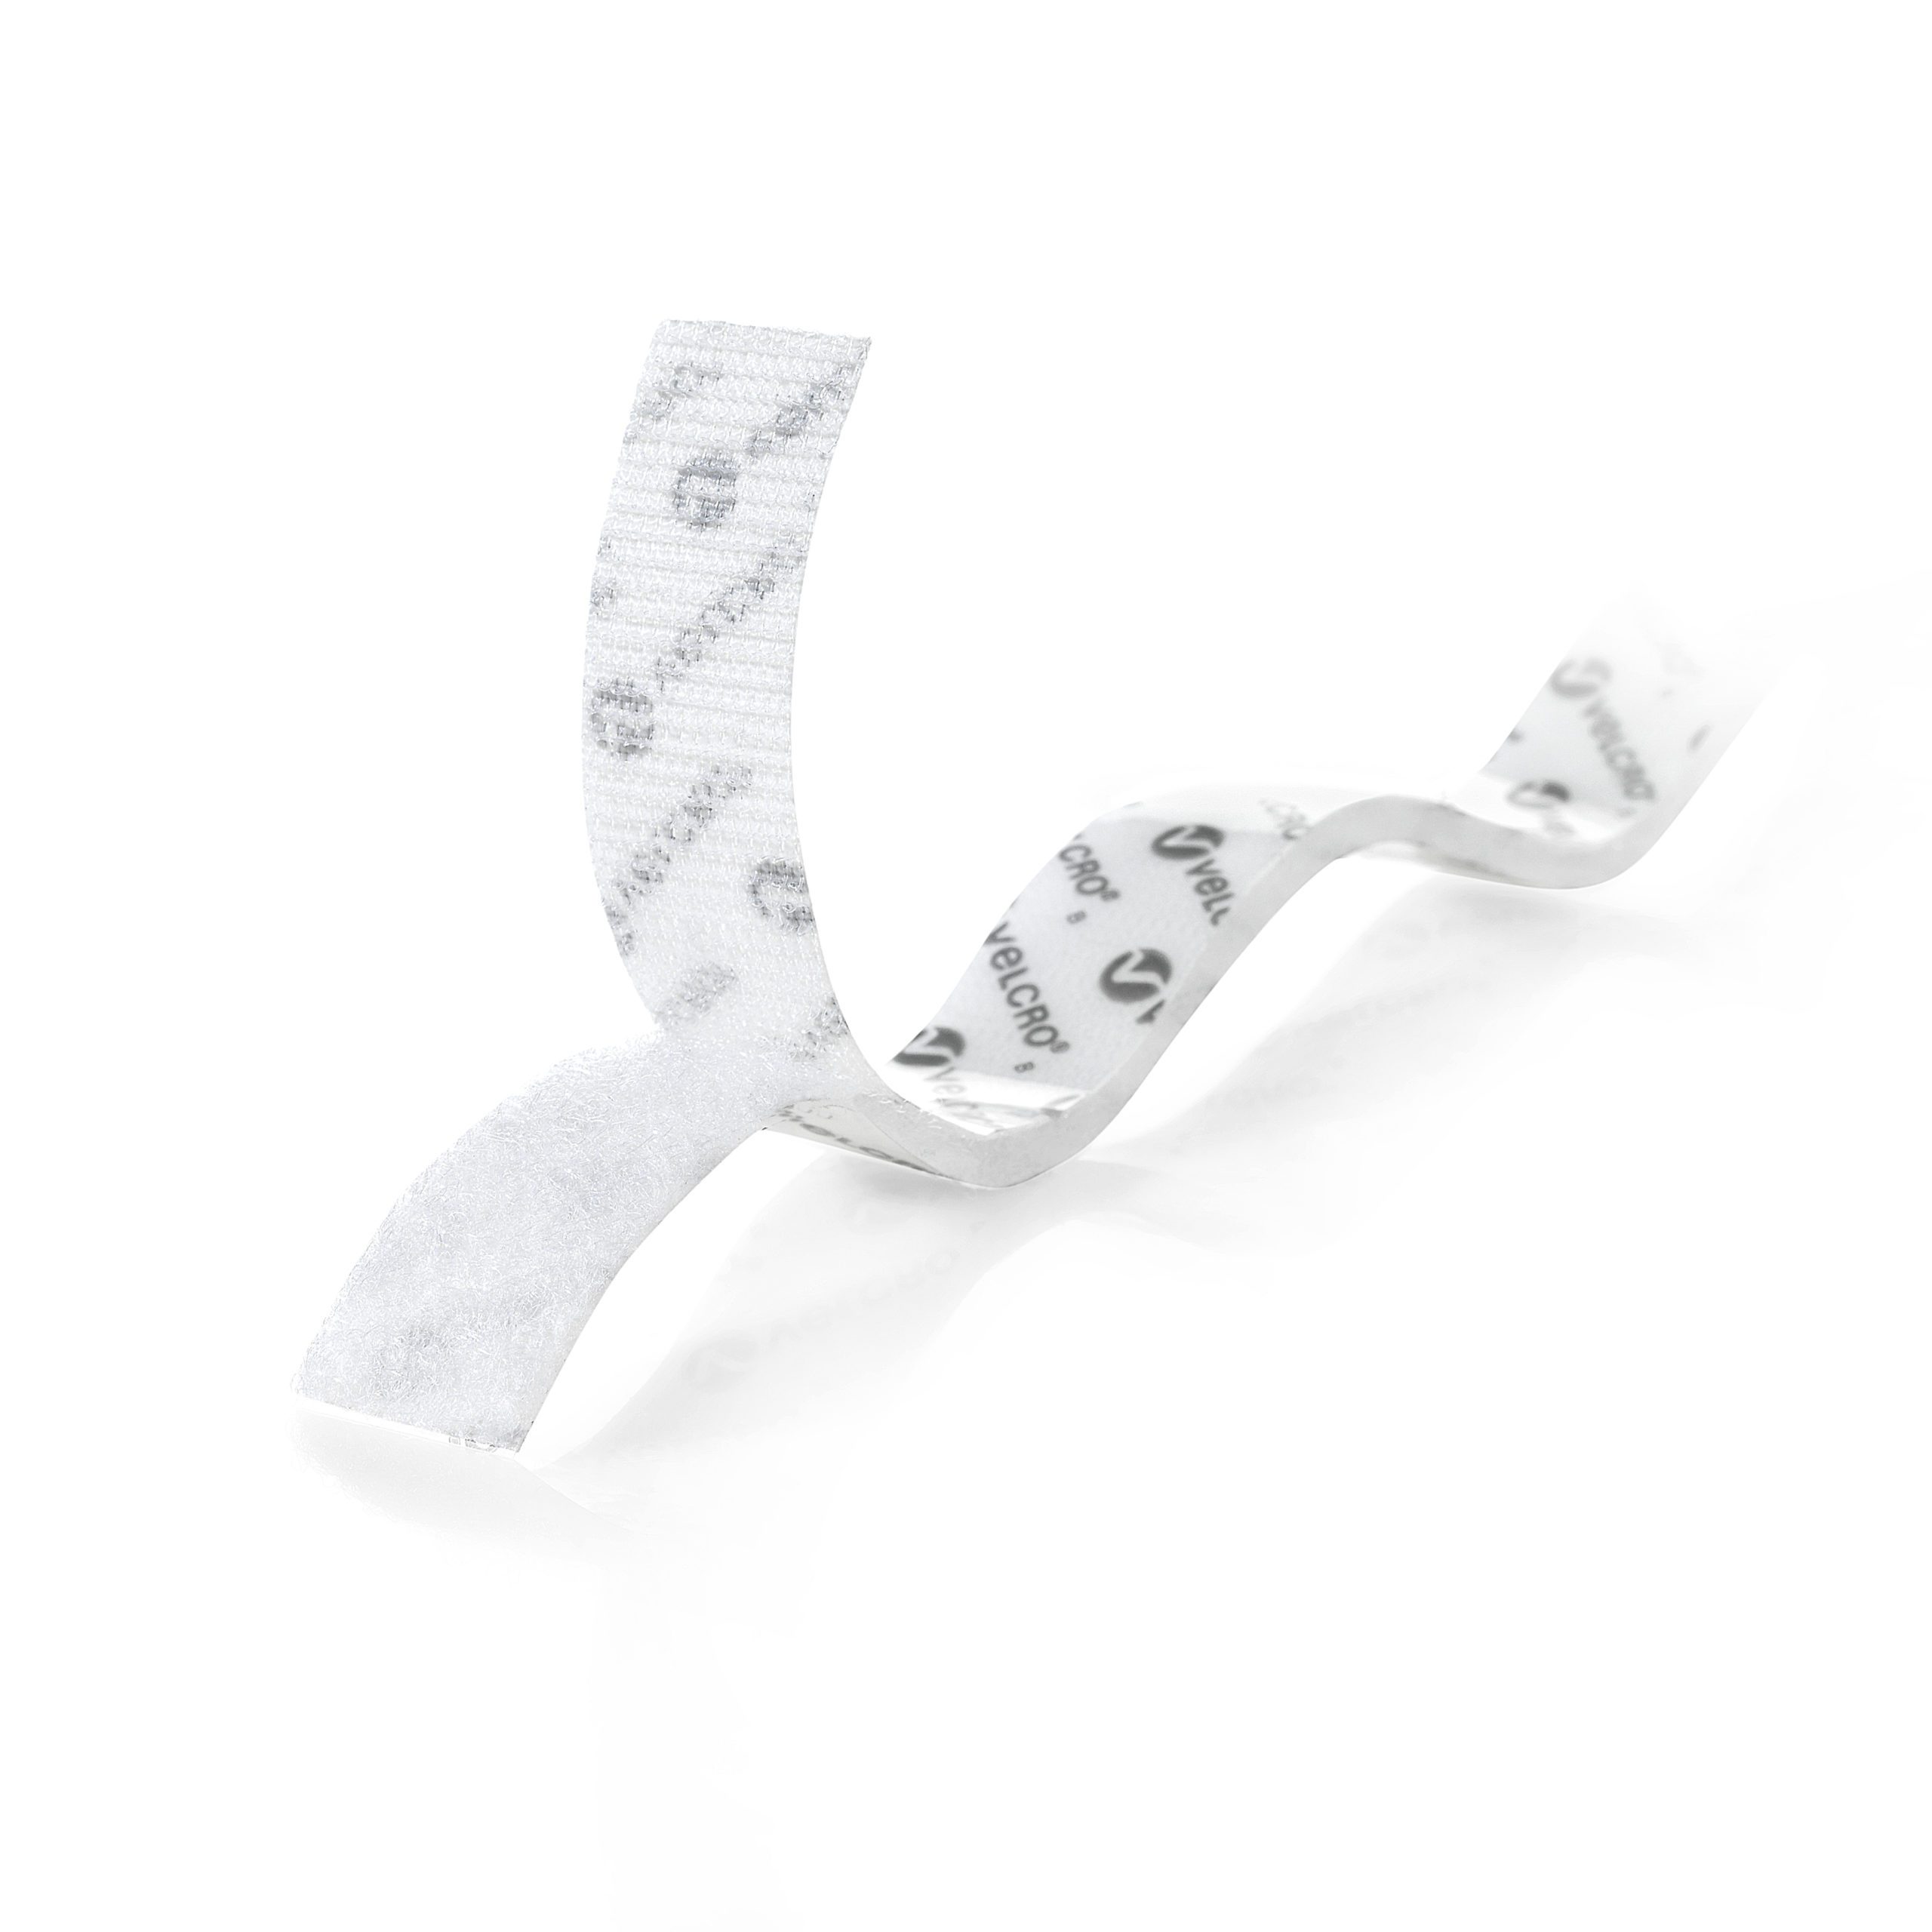 VELCRO Brand Hook and Loop Tape White 19mm x 1.8m